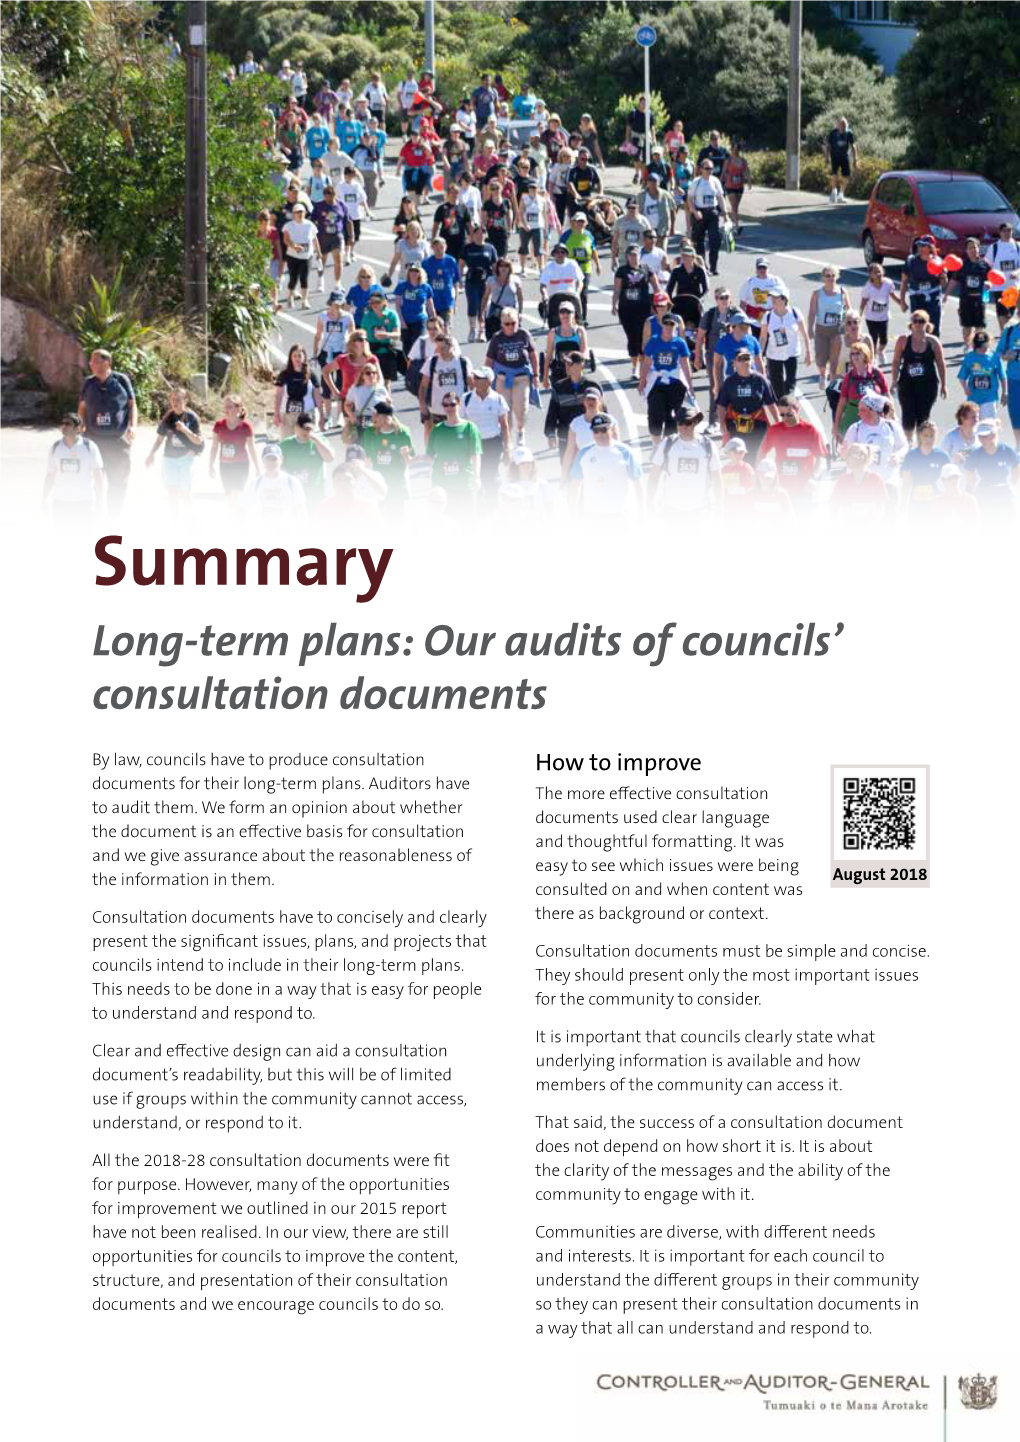 Summary Long-Term Plans: Our Audits of Councils’ Consultation Documents